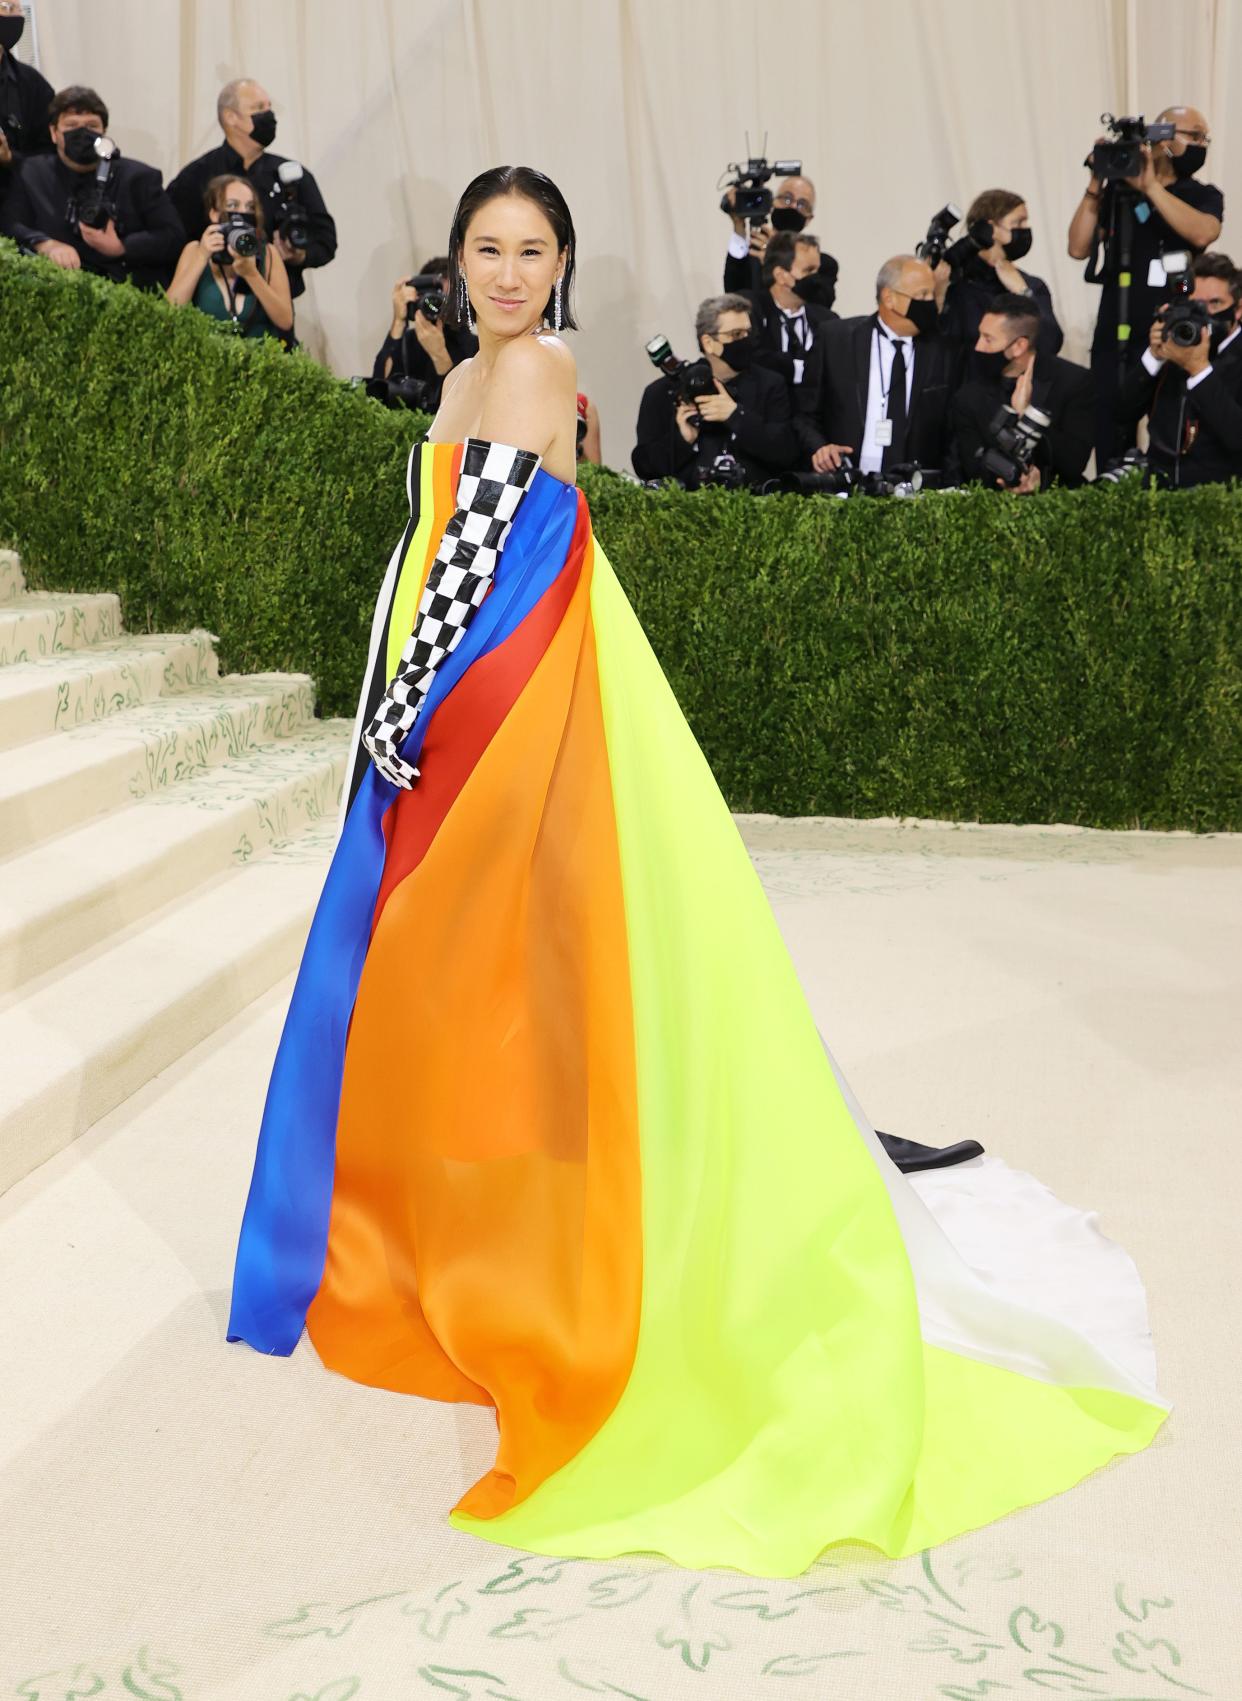 Eva Chen, Head of Fashion and Shopping, Instagram, attends The 2021 Met Gala Celebrating In America: A Lexicon Of Fashion at Metropolitan Museum of Art on Sept. 13, 2021 in New York.